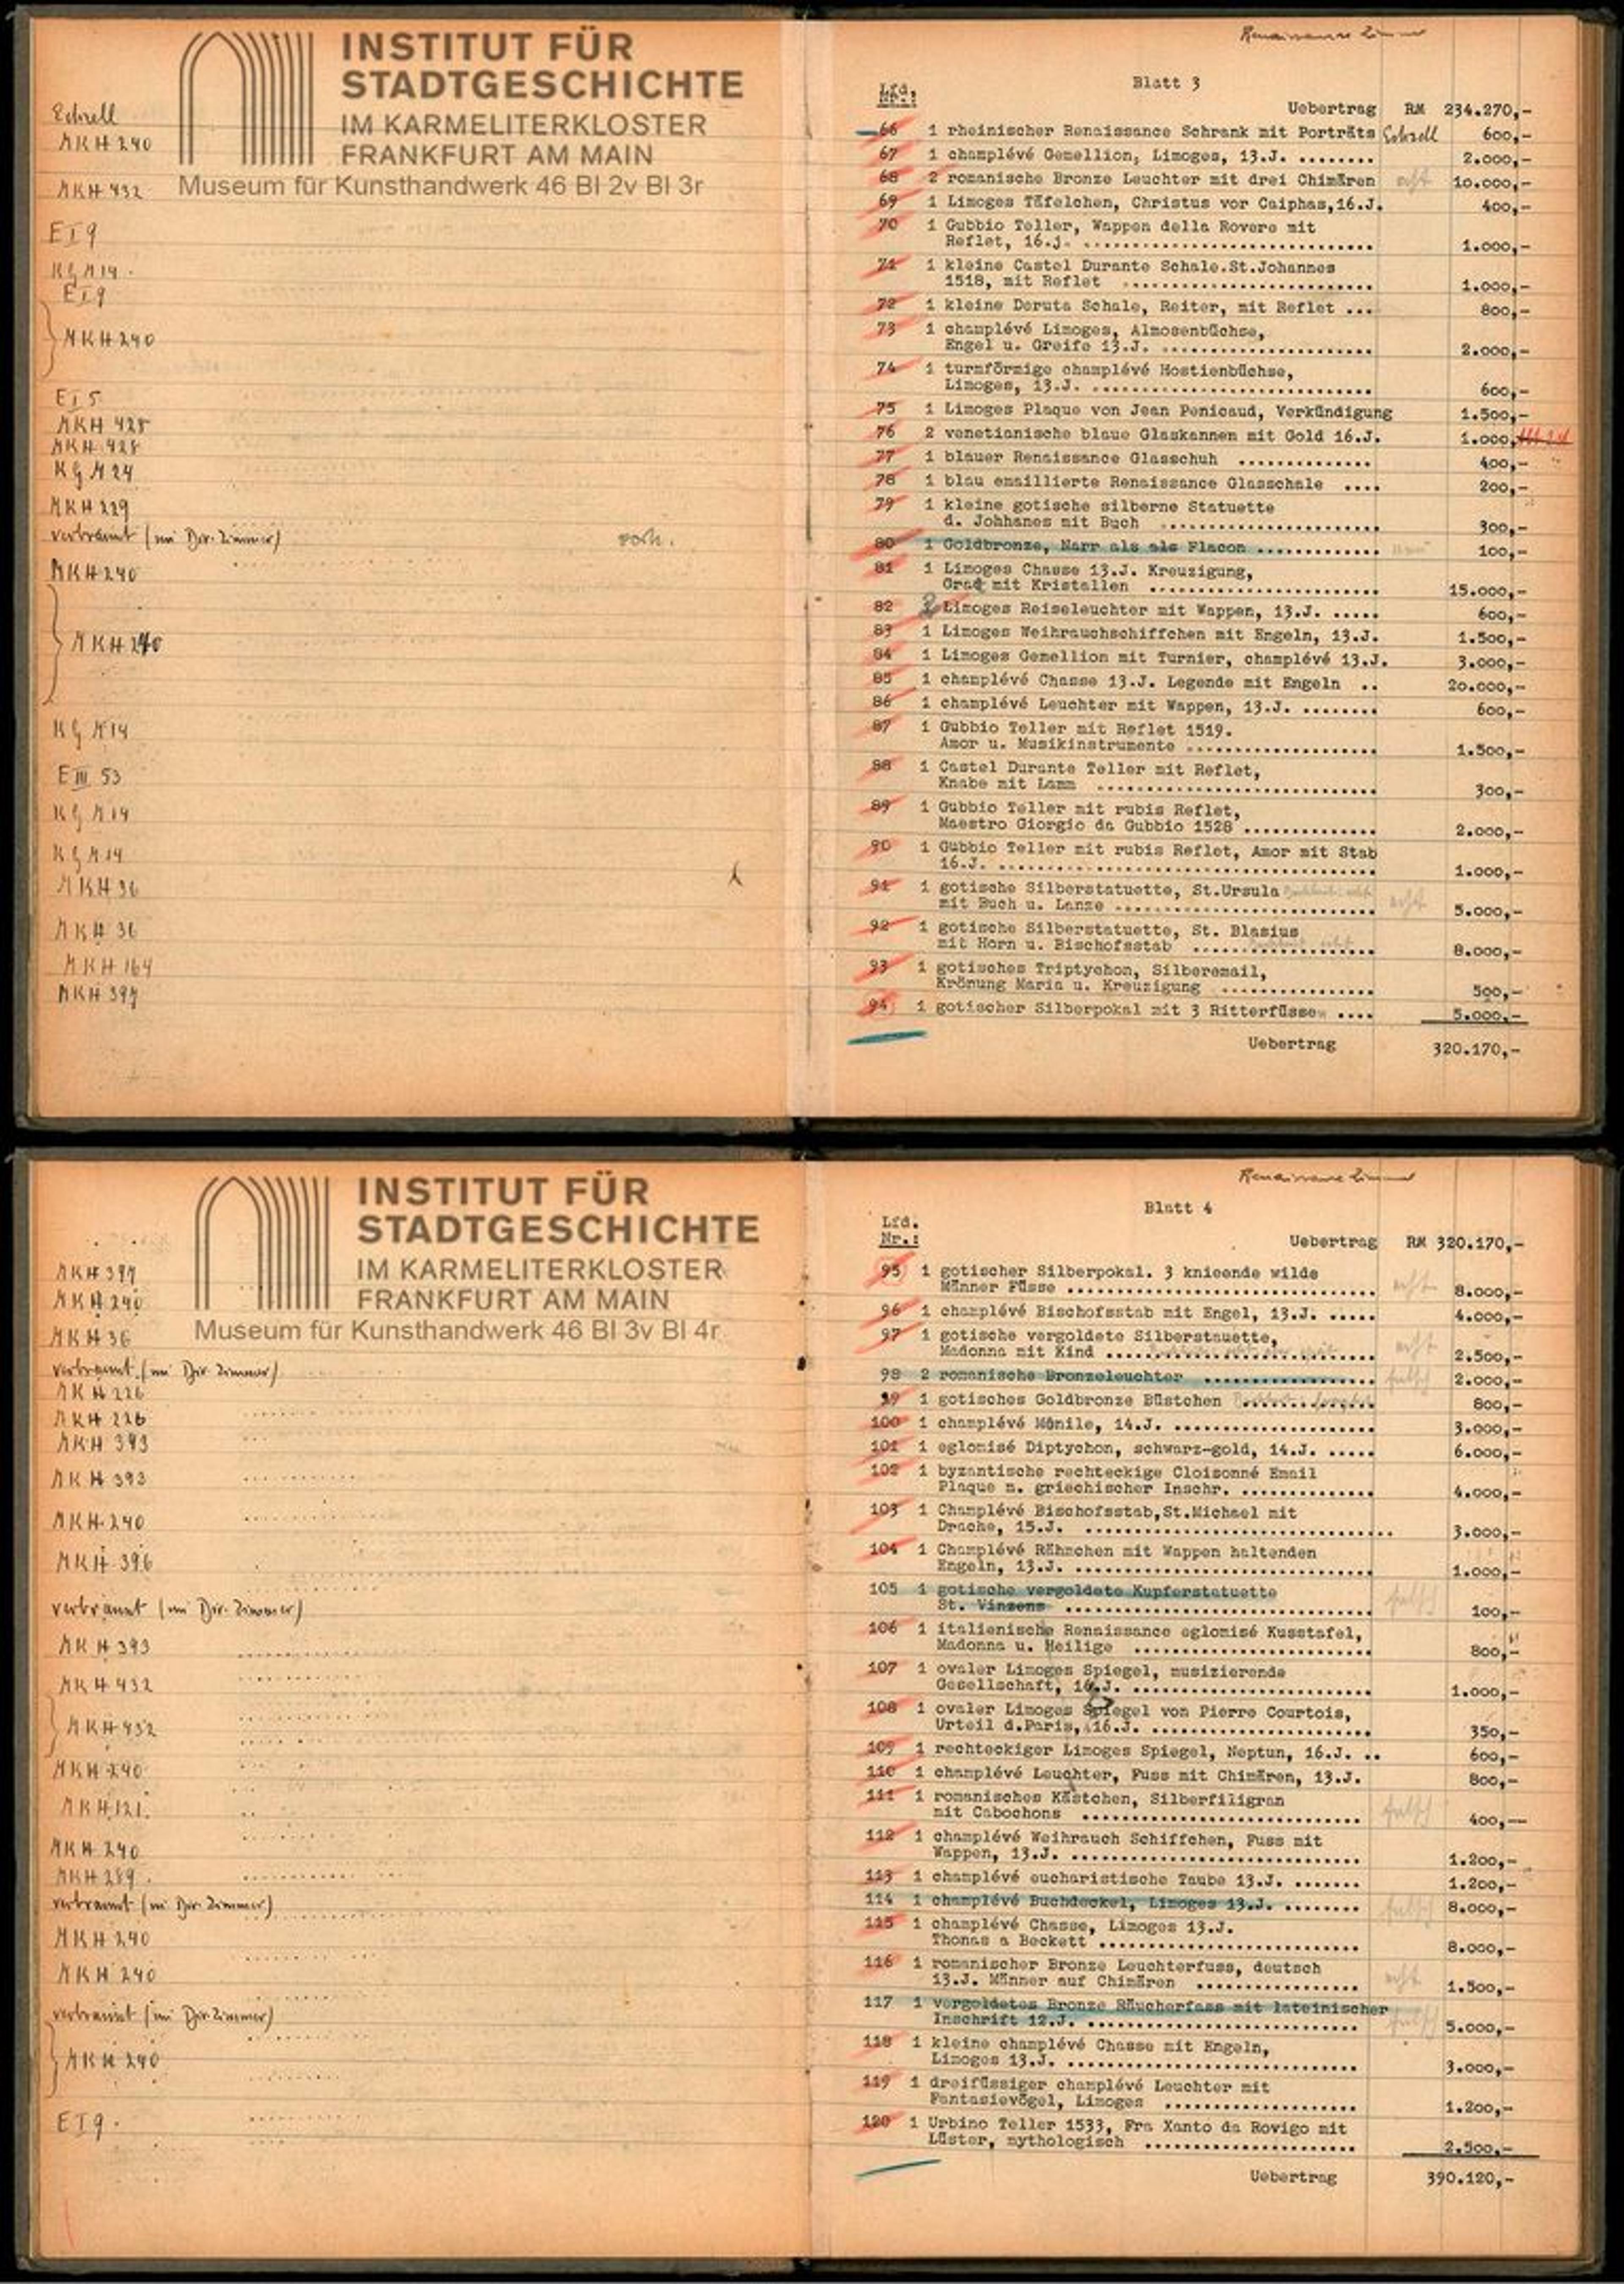 Two full-page spreads of a book. The pages show numbered entries.